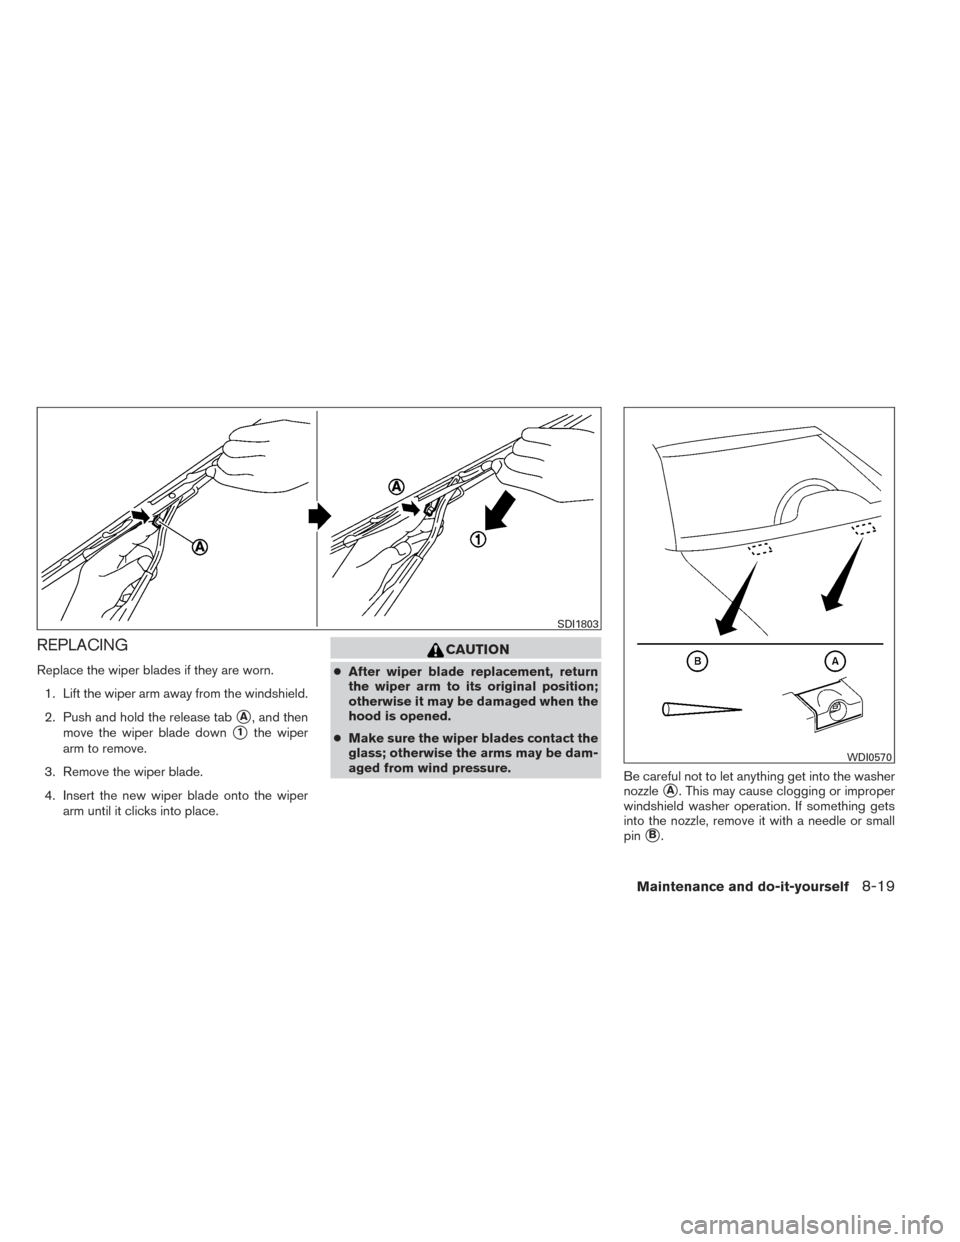 NISSAN VERSA SEDAN 2014 2.G Owners Manual REPLACING
Replace the wiper blades if they are worn.1. Lift the wiper arm away from the windshield.
2. Push and hold the release tab
A, and then
move the wiper blade down
1the wiper
arm to remove.
3